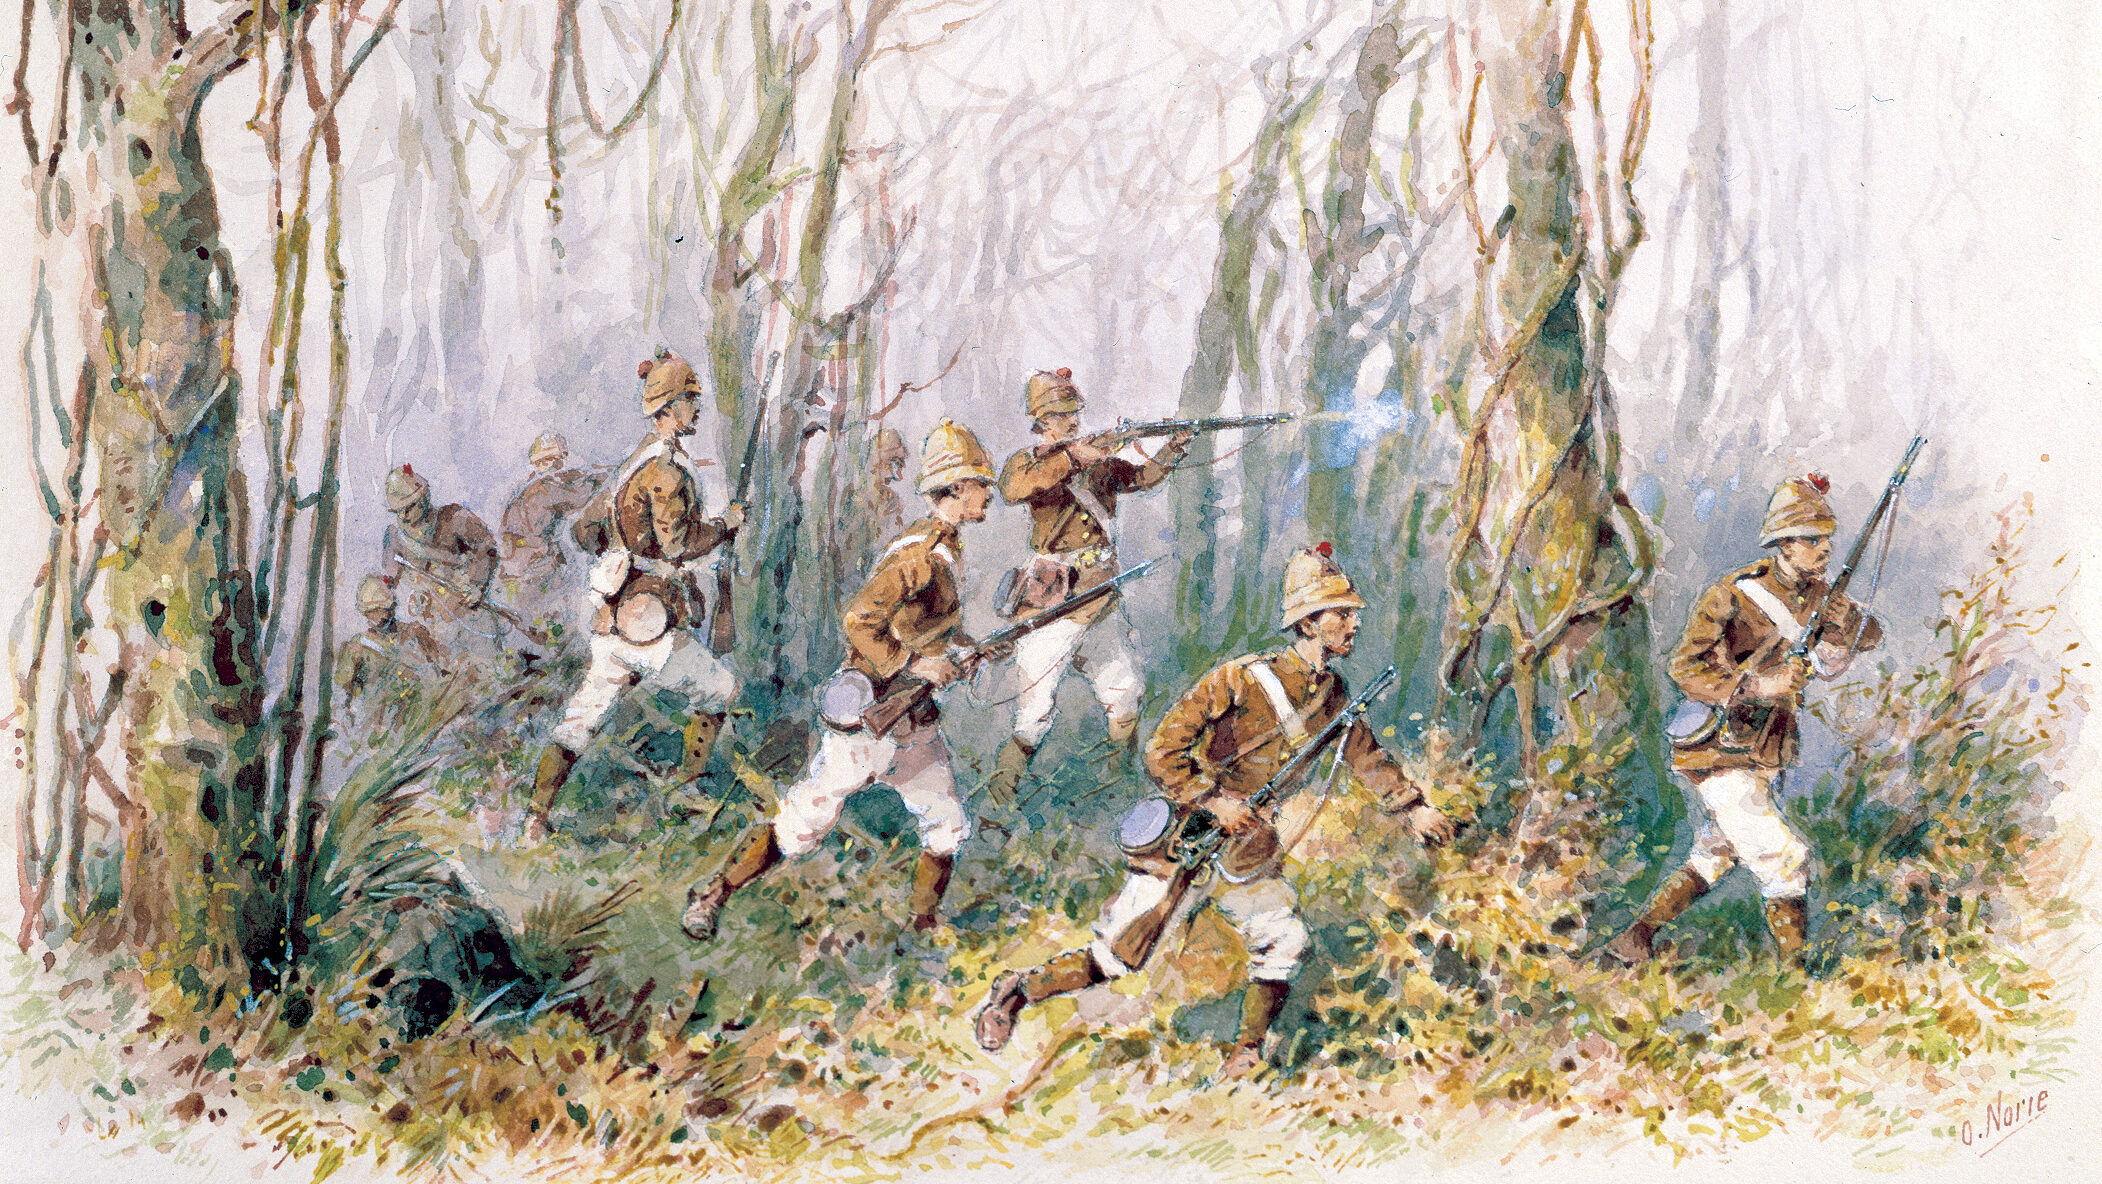 Soldiers of the 42nd Highlanders maneuver in the jungle during the Ashanti War of 1874. Their general, Garnet Joseph Wolseley, disliked war correspondents but put them to good use.